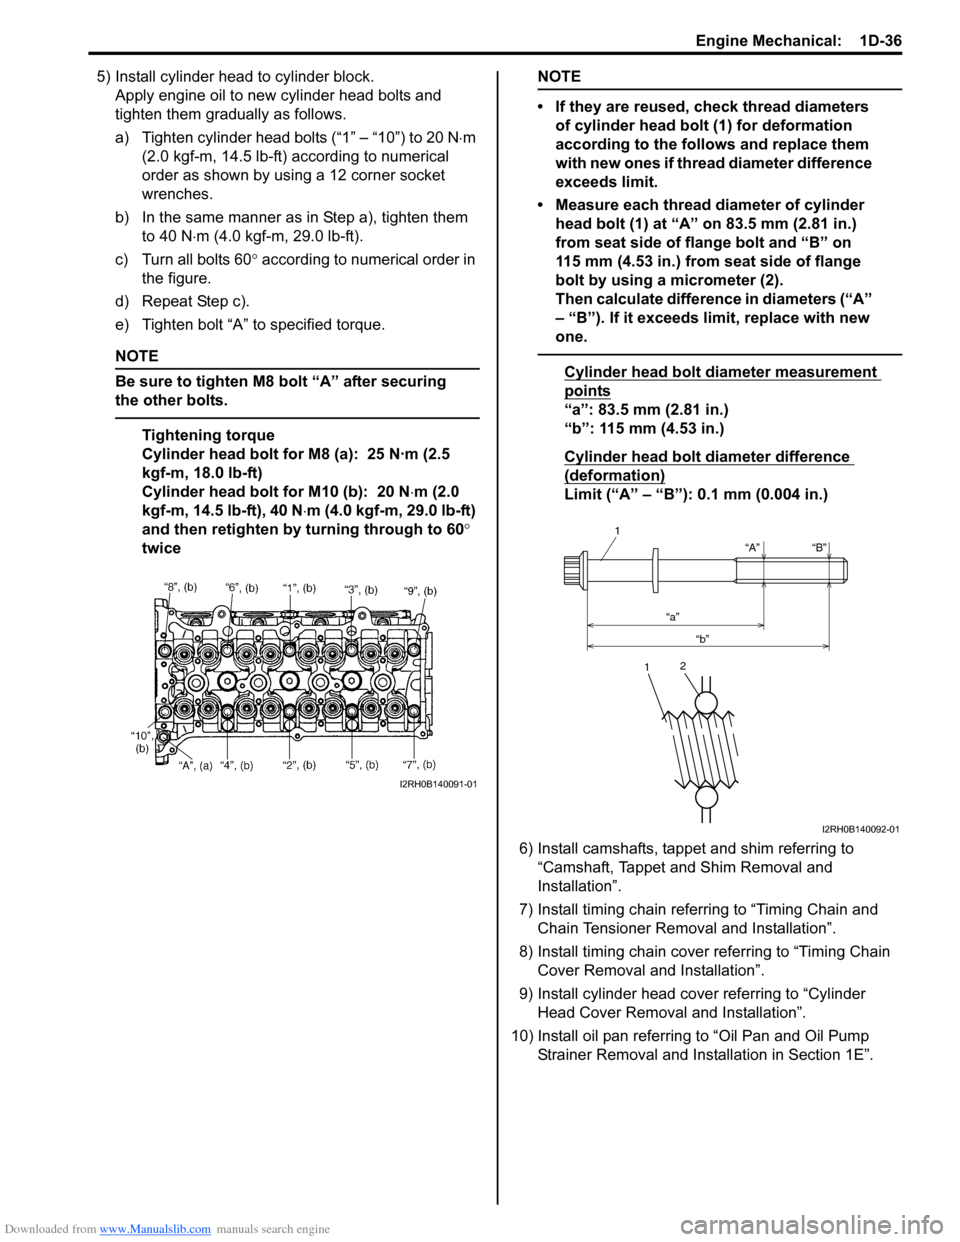 SUZUKI SWIFT 2007 2.G Service Service Manual Downloaded from www.Manualslib.com manuals search engine Engine Mechanical:  1D-36
5) Install cylinder head to cylinder block.Apply engine oil to new cylinder head bolts and 
tighten them gradually as